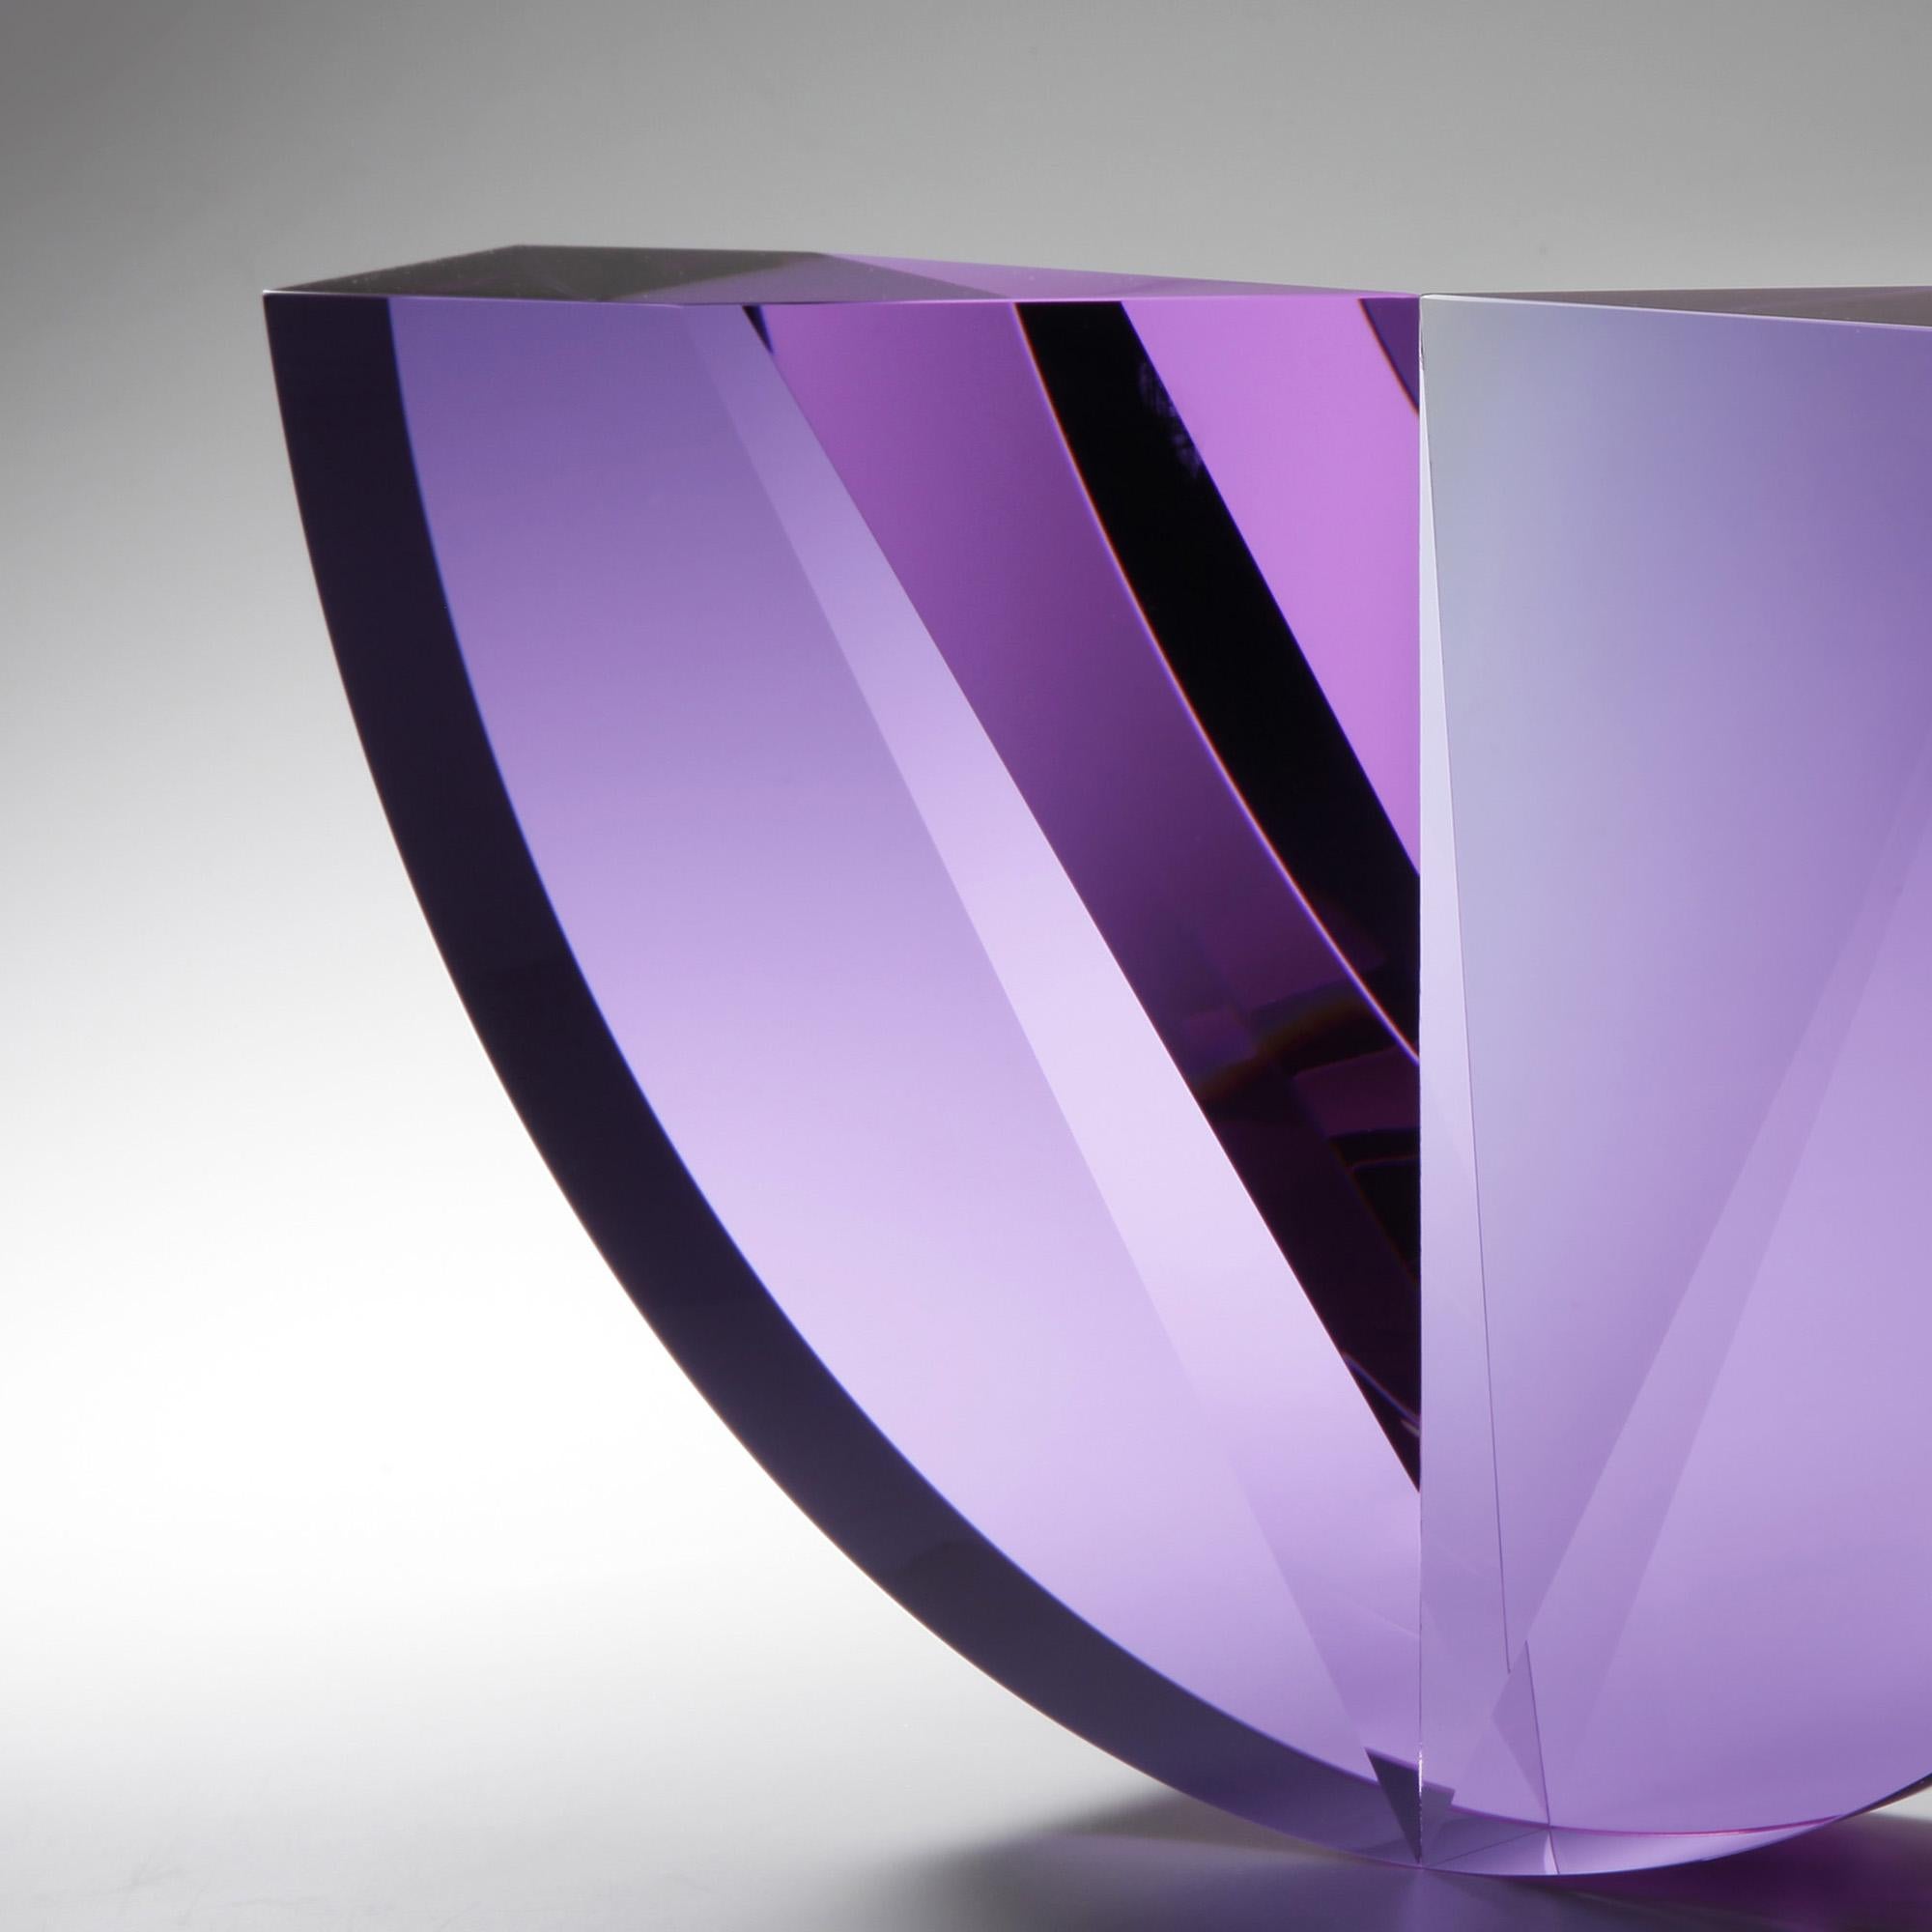 This abstract optic glass sculpture created by Czech artist Tomas Brzon is noteworthy for both its geometric shape and purity. Brzon uses pure optic glass, void of any defects, which enables its perfection to shine through. The cuts and contours of